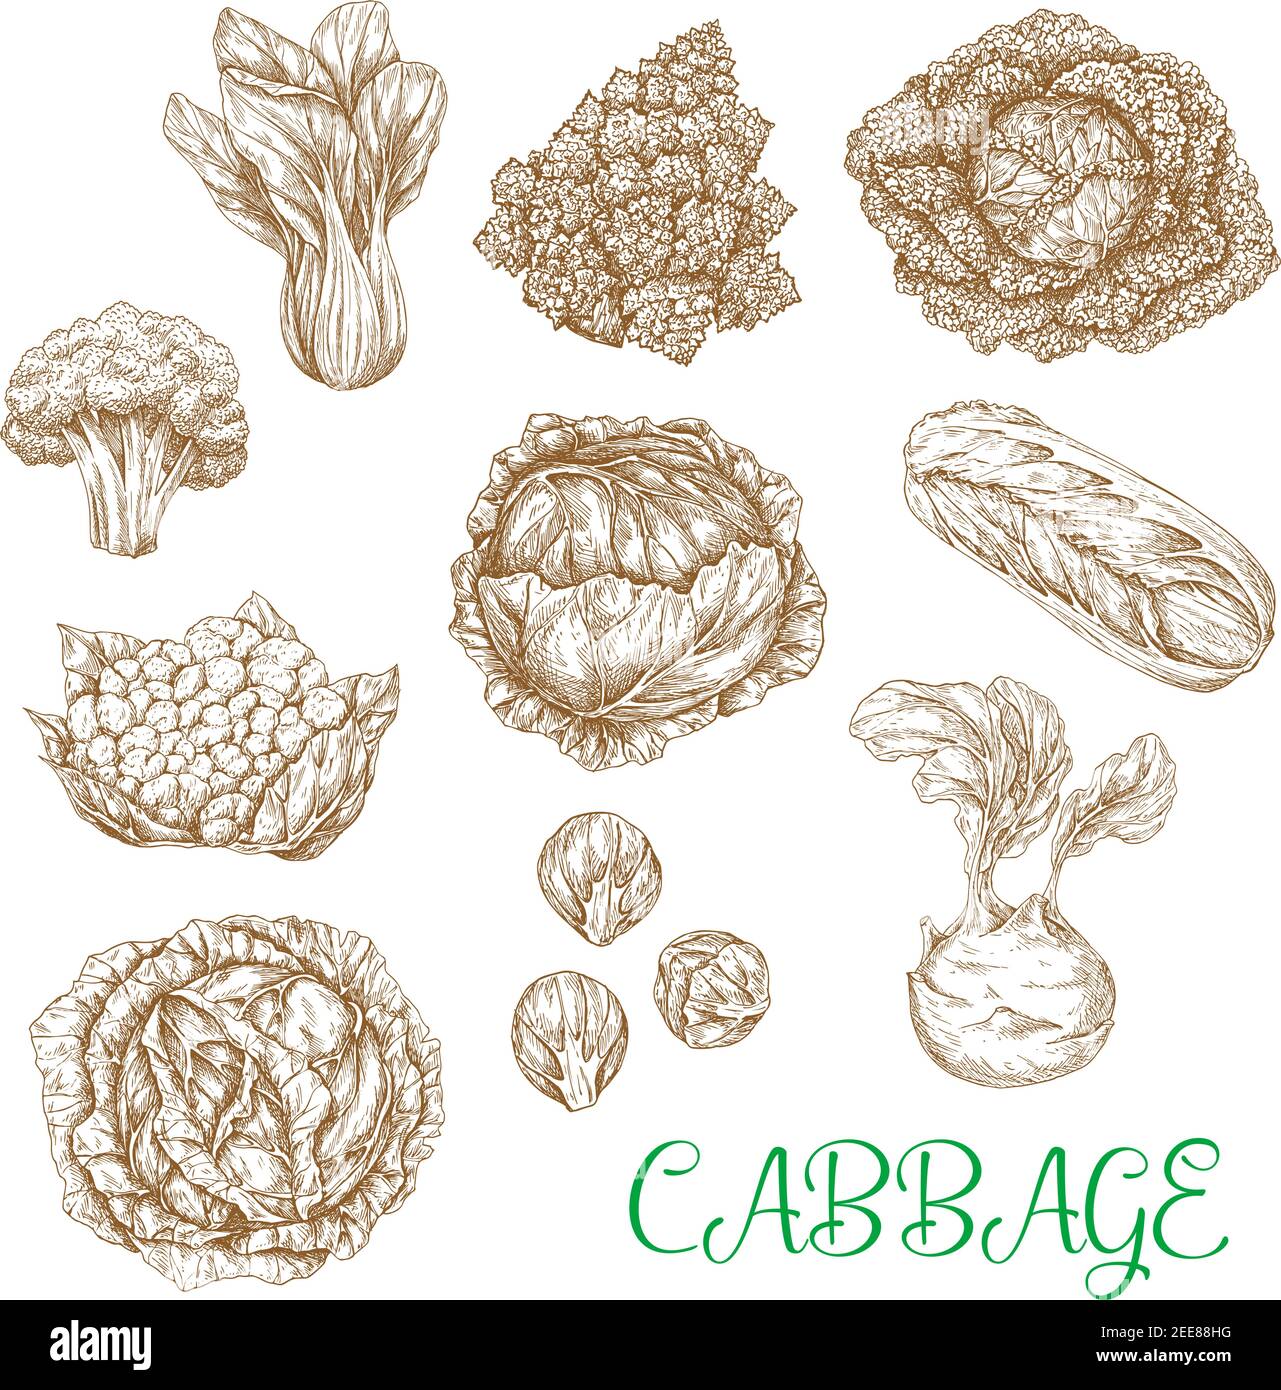 Cabbages vegetables sorts vector sketches. Set of leafy veggies white and red cabbage or cauliflower, chinese napa and romanesco broccoli, kohlrabi an Stock Vector